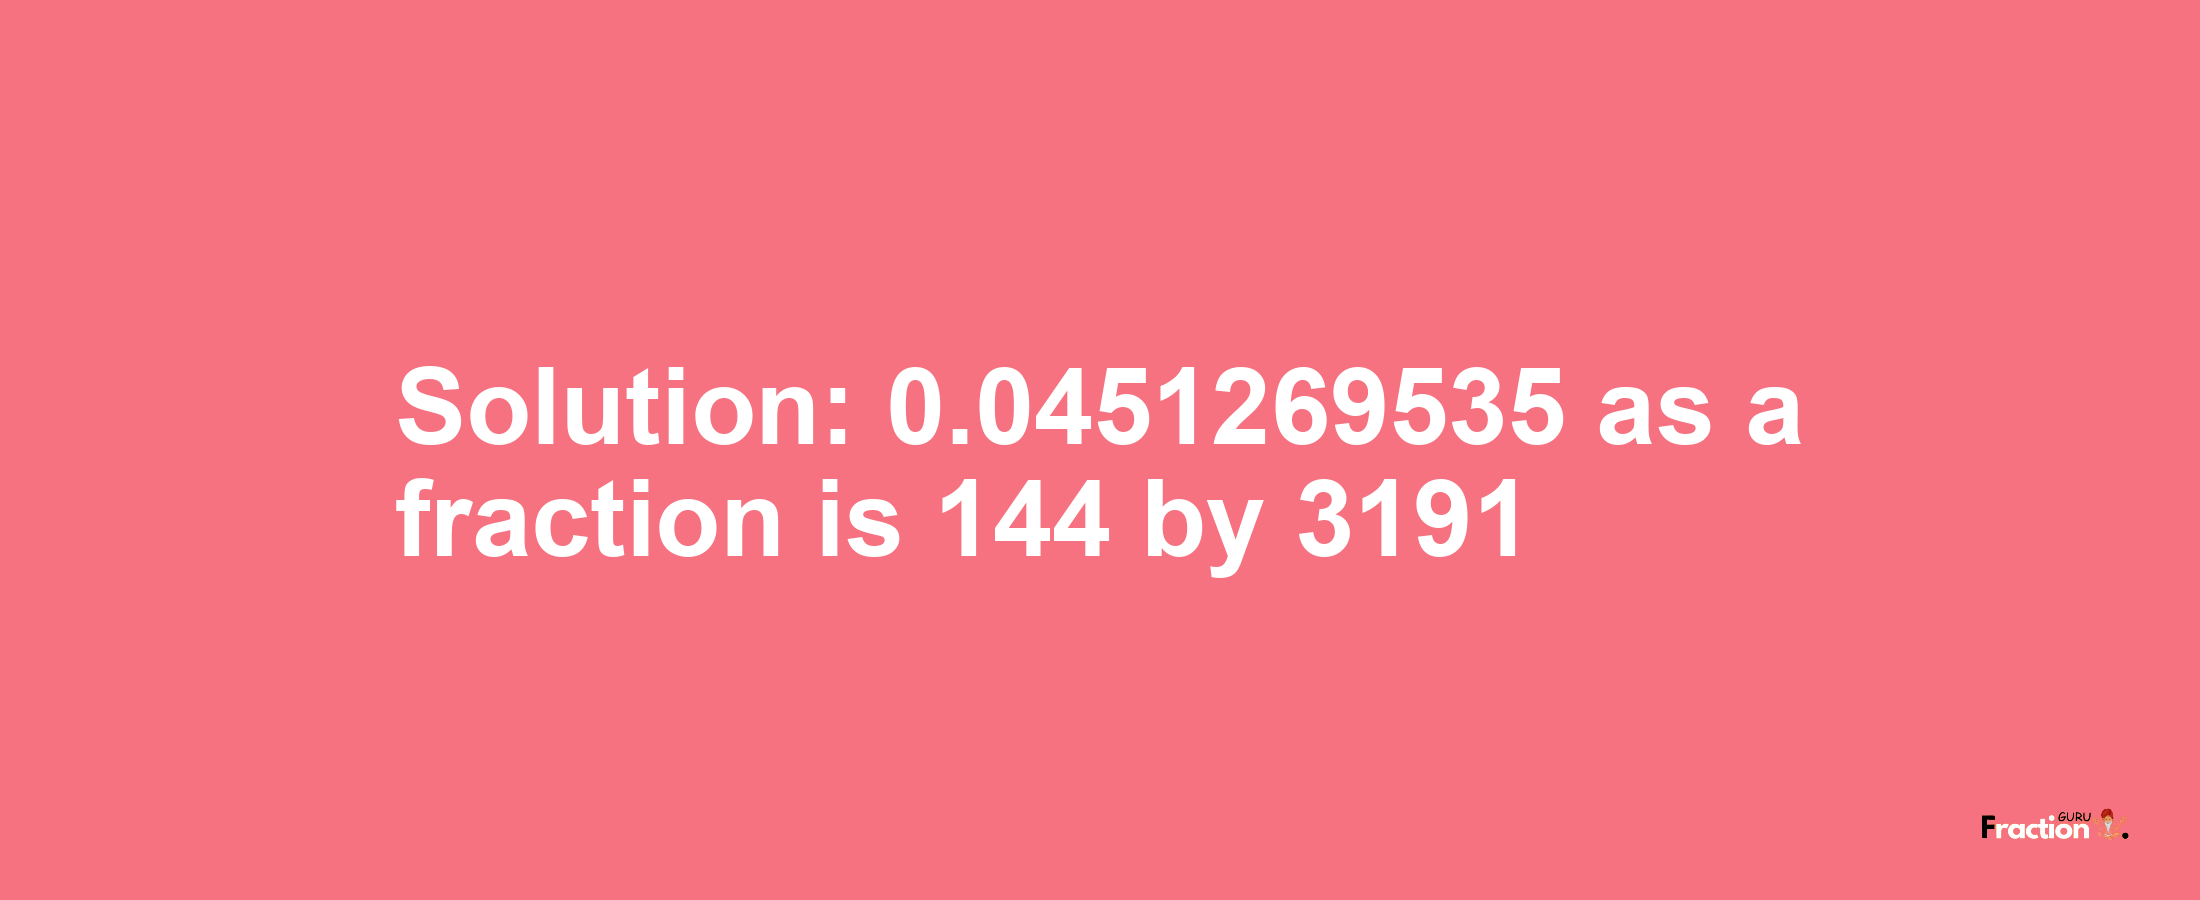 Solution:0.0451269535 as a fraction is 144/3191